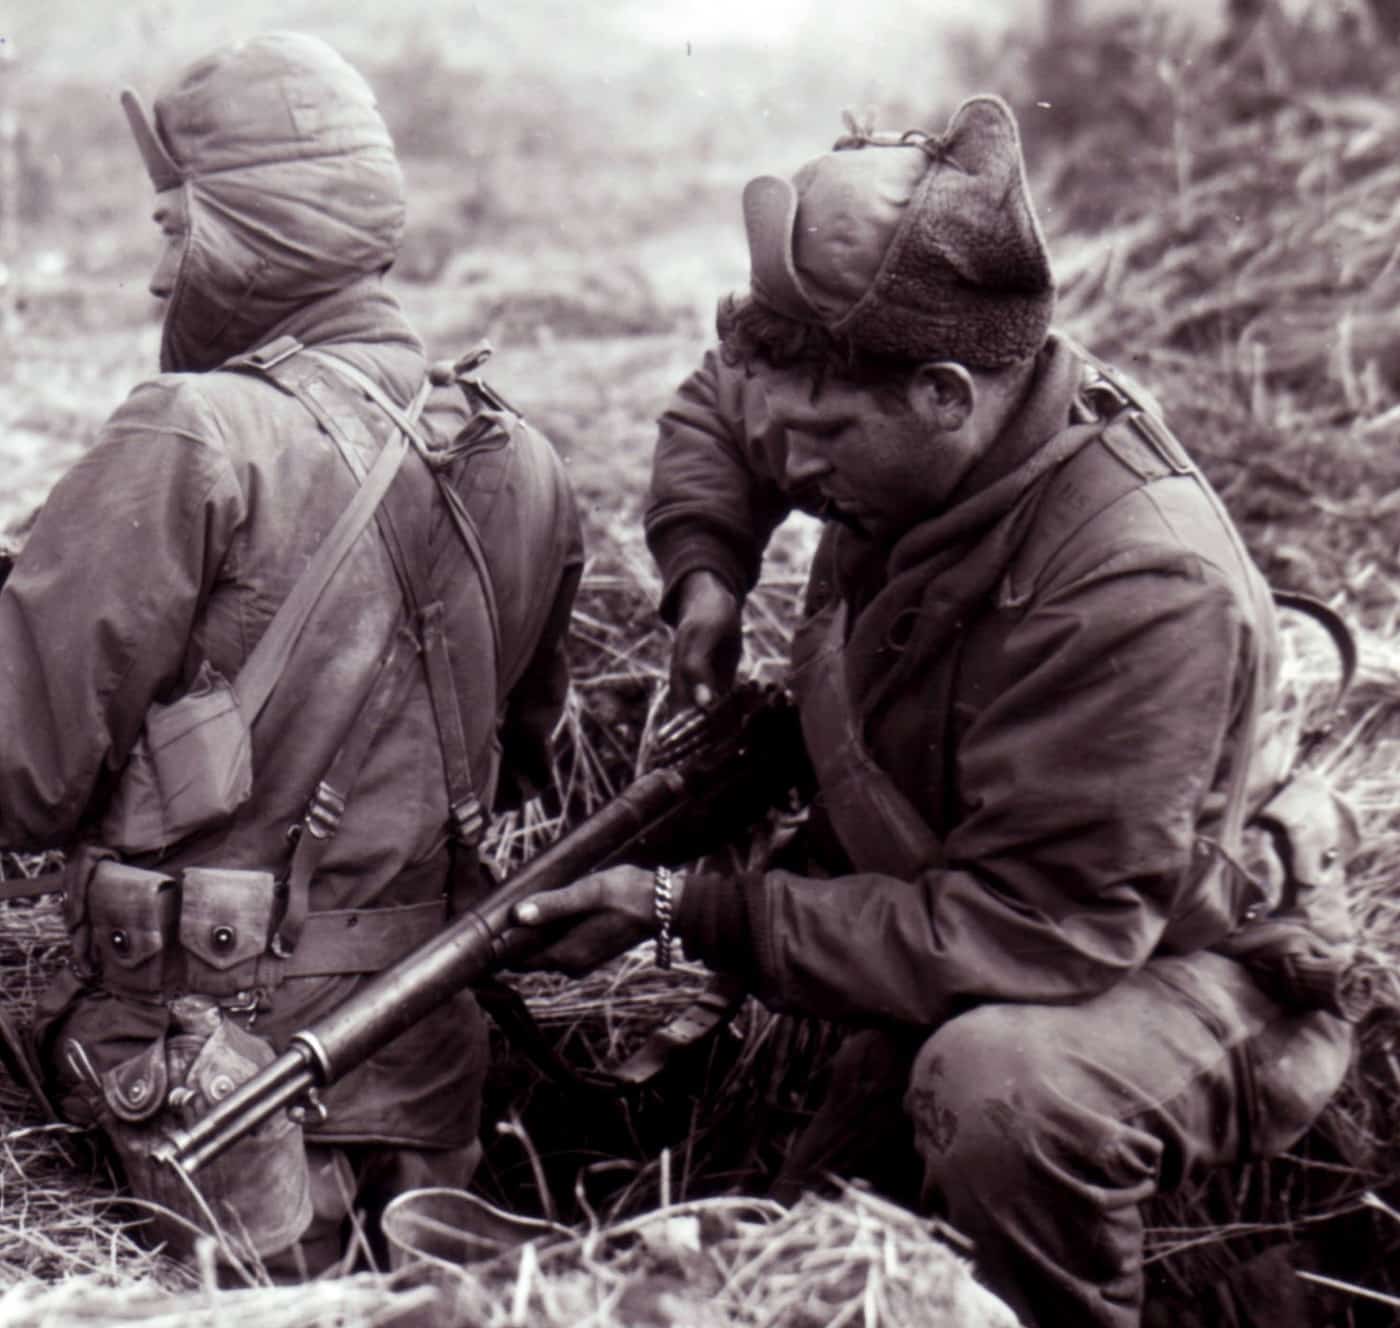 m1 sniper 25th infantry division in korea january 1951